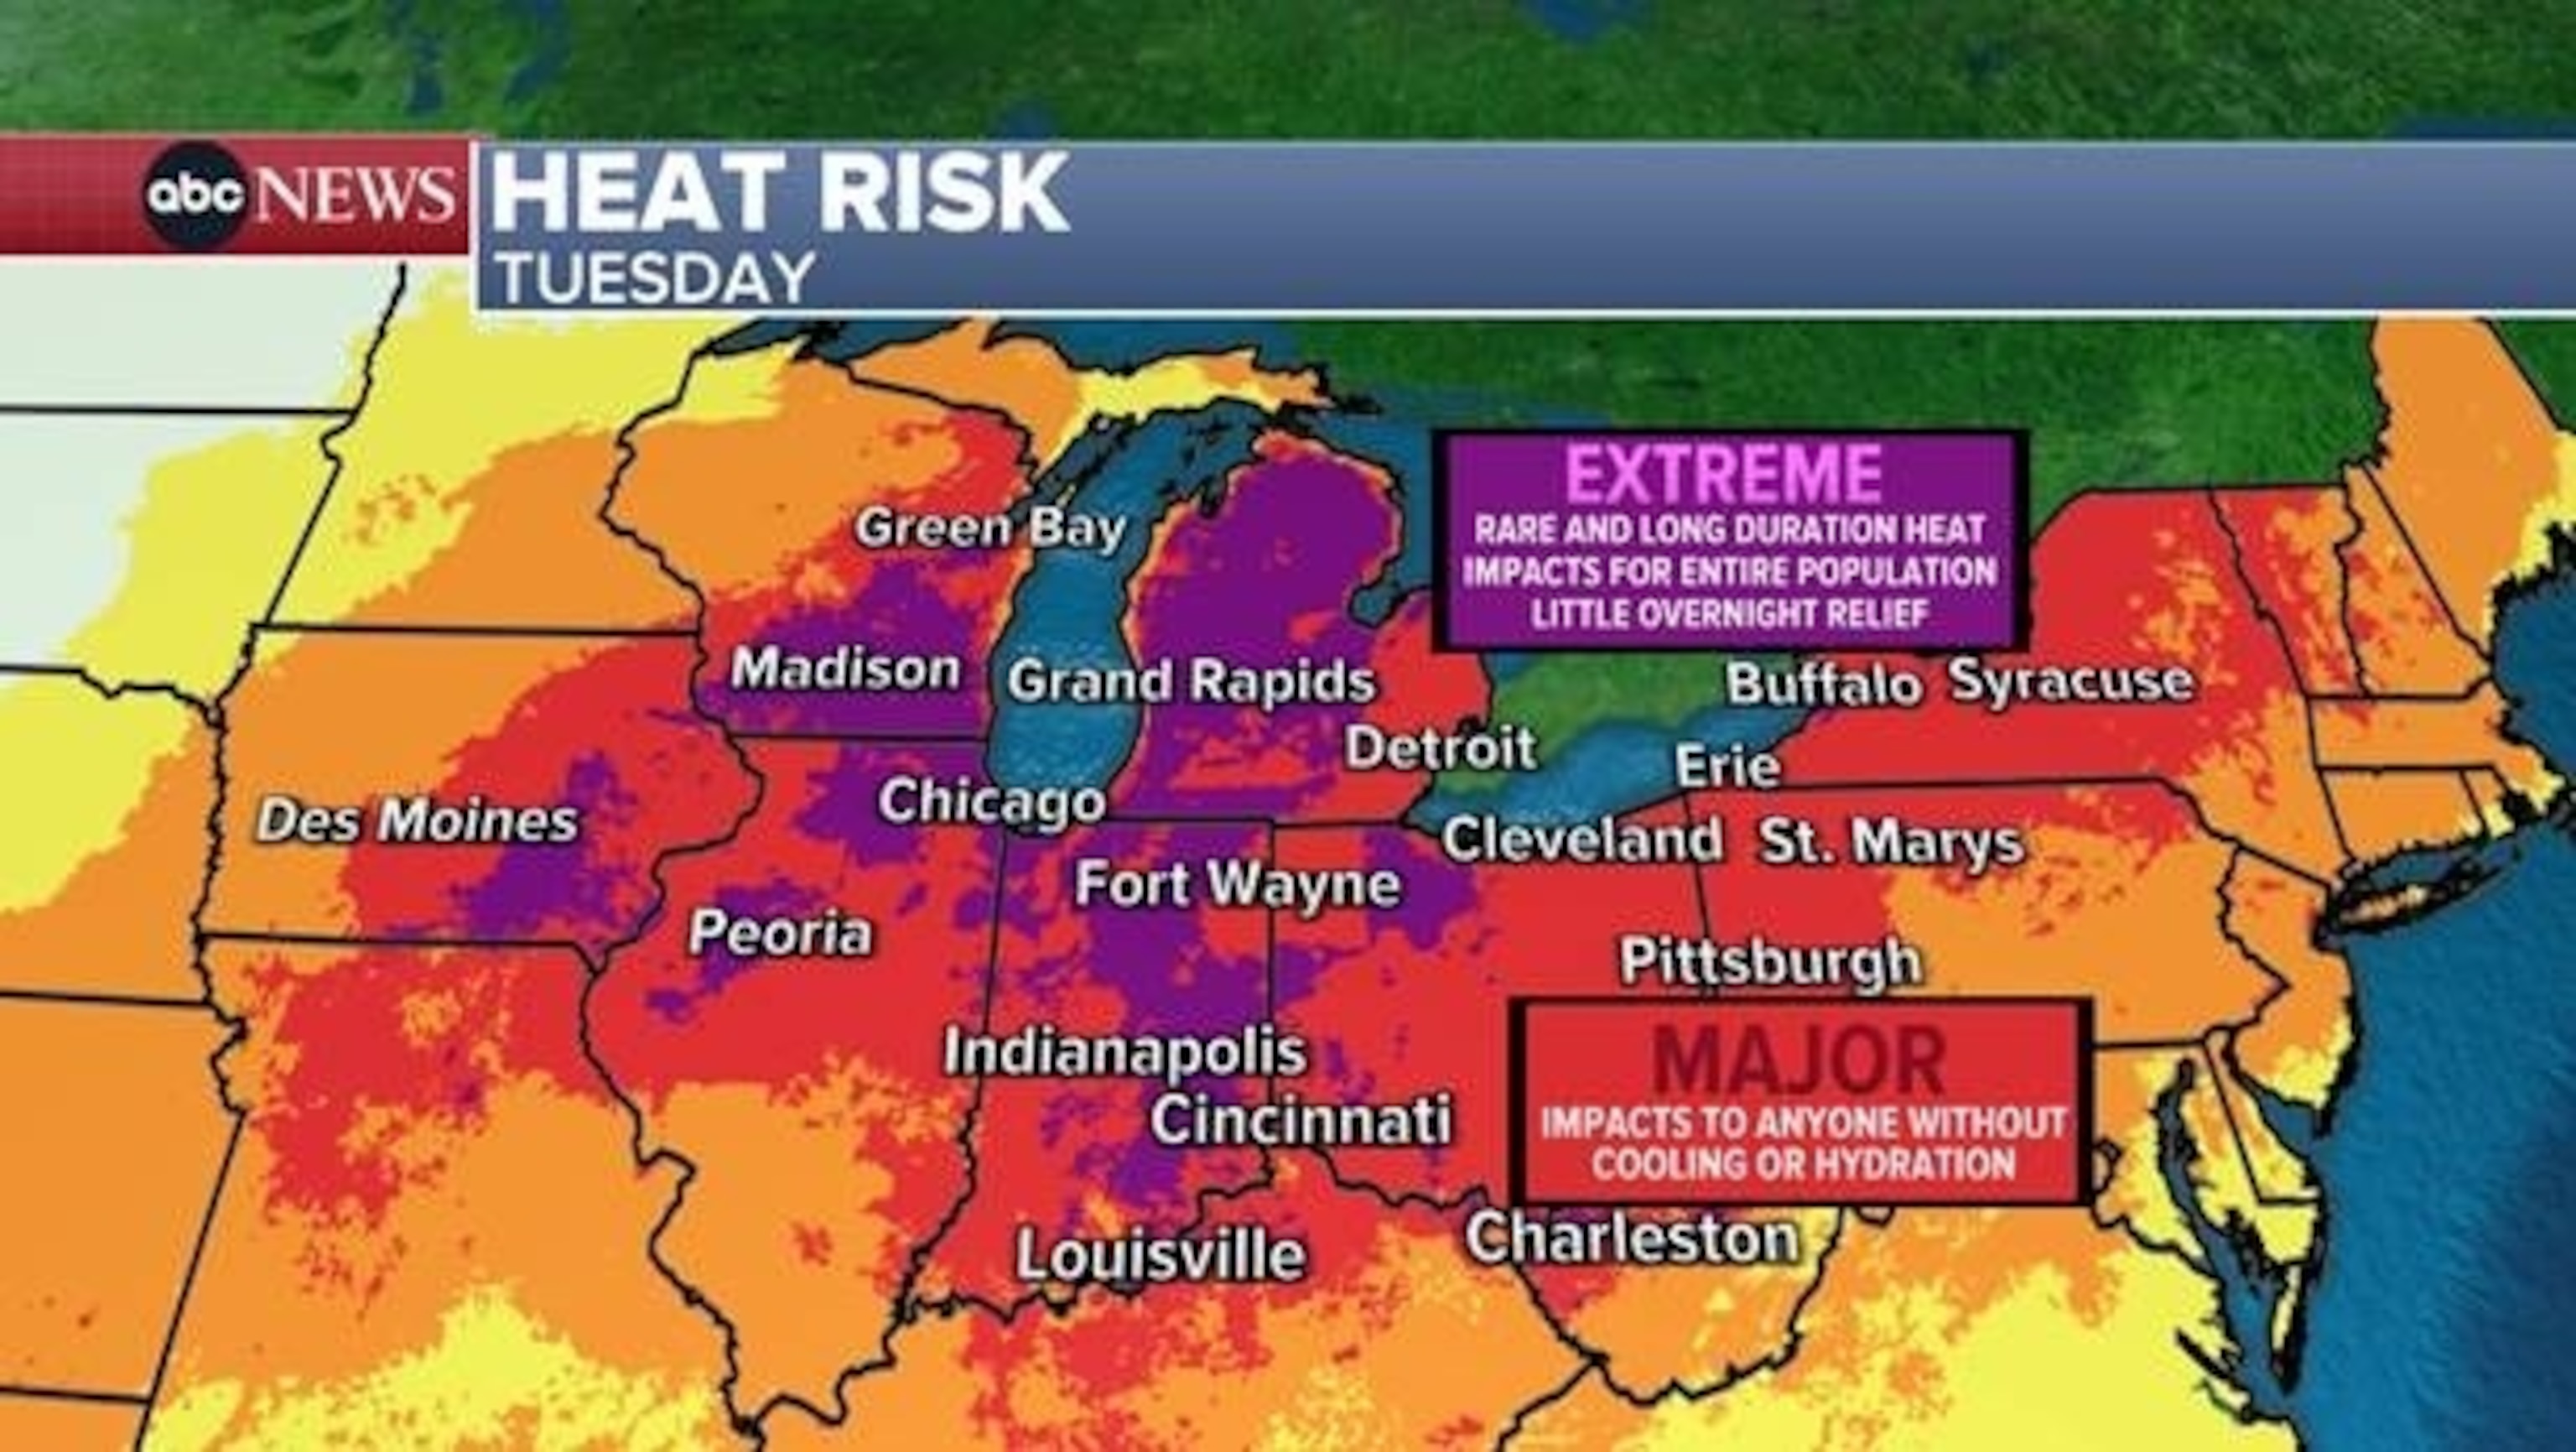 PHOTO: Heat risk weather map for Tuesday, June 18.